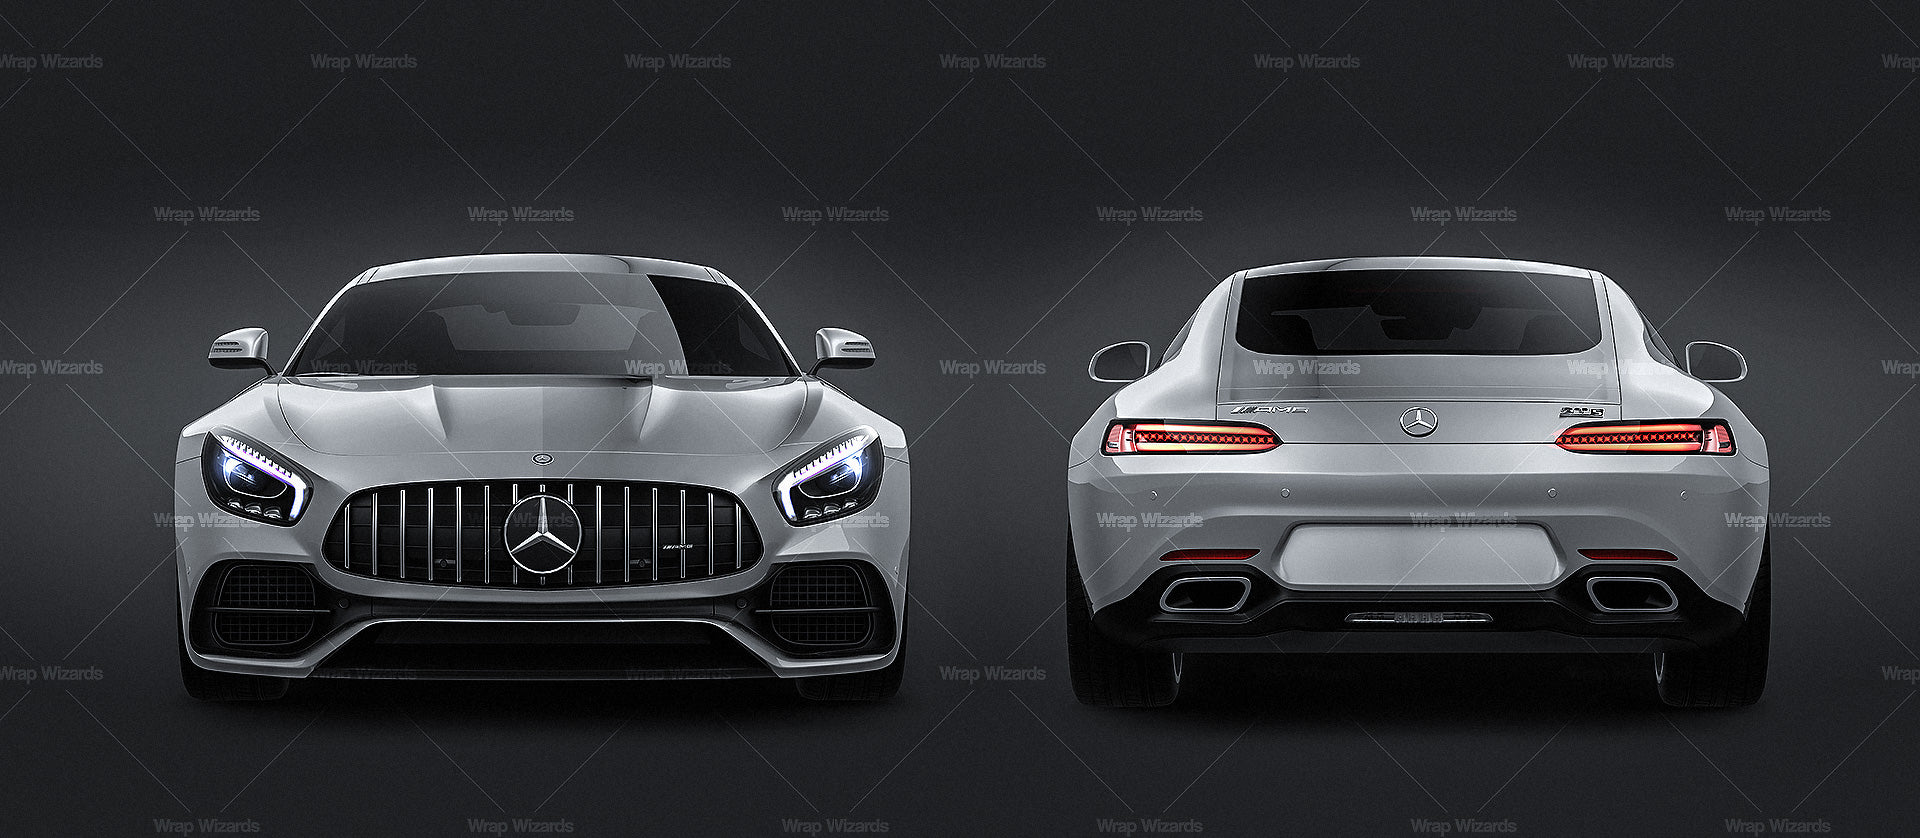 Mercedes-Benz AMG GT S 2018 glossy finish - all sides Car Mockup Template.psd